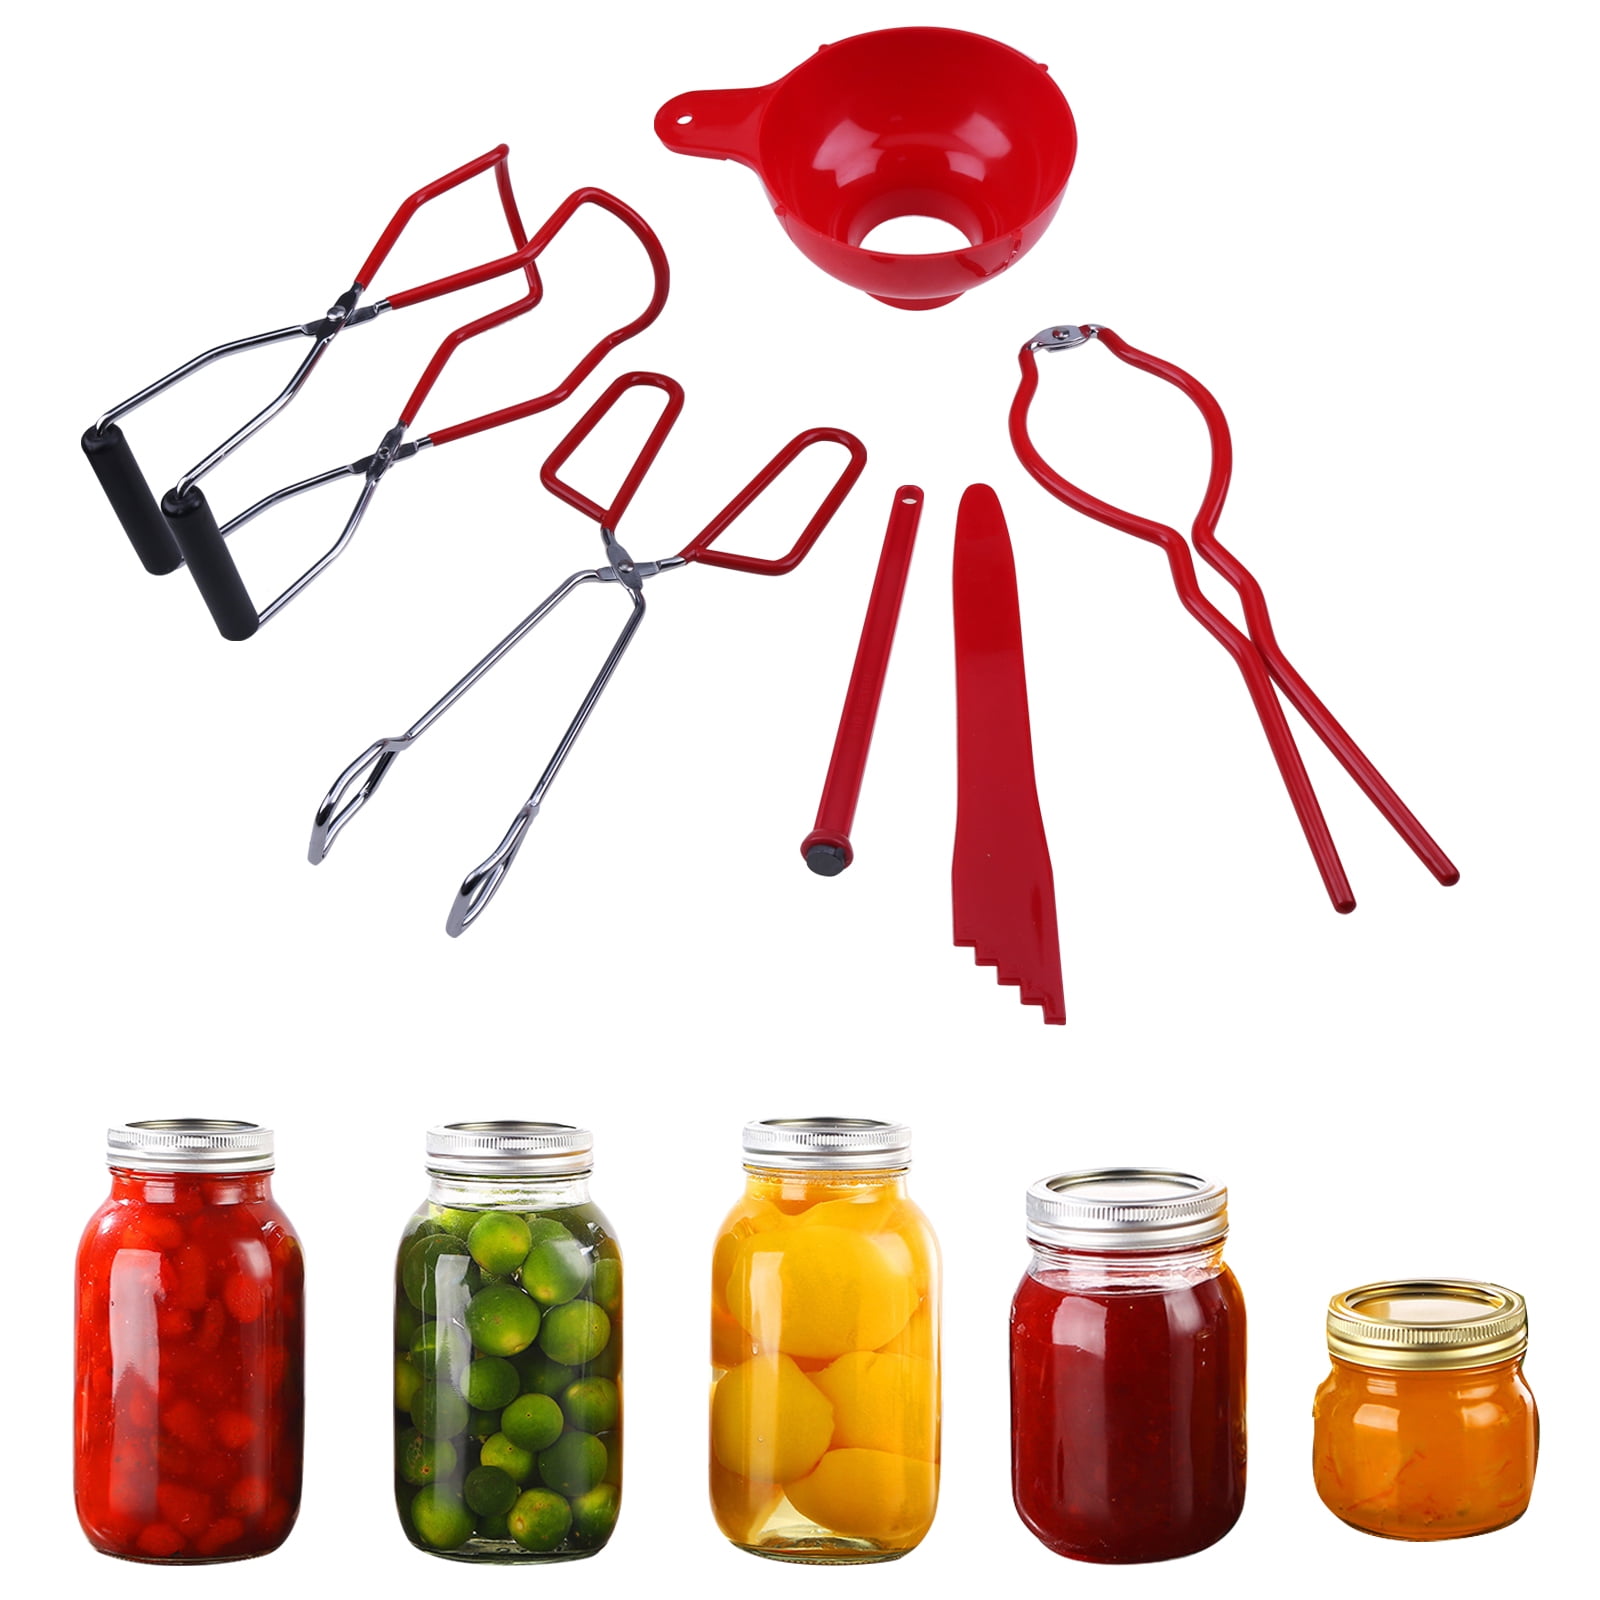 Zavor 6pc Home Canning Kit - BPA-Free Canning Supplies Starter Kit w/a Wide  Mouth Canning Funnel, Jar Lifter, Canning Magnet, Tongs, Ladle and Jar